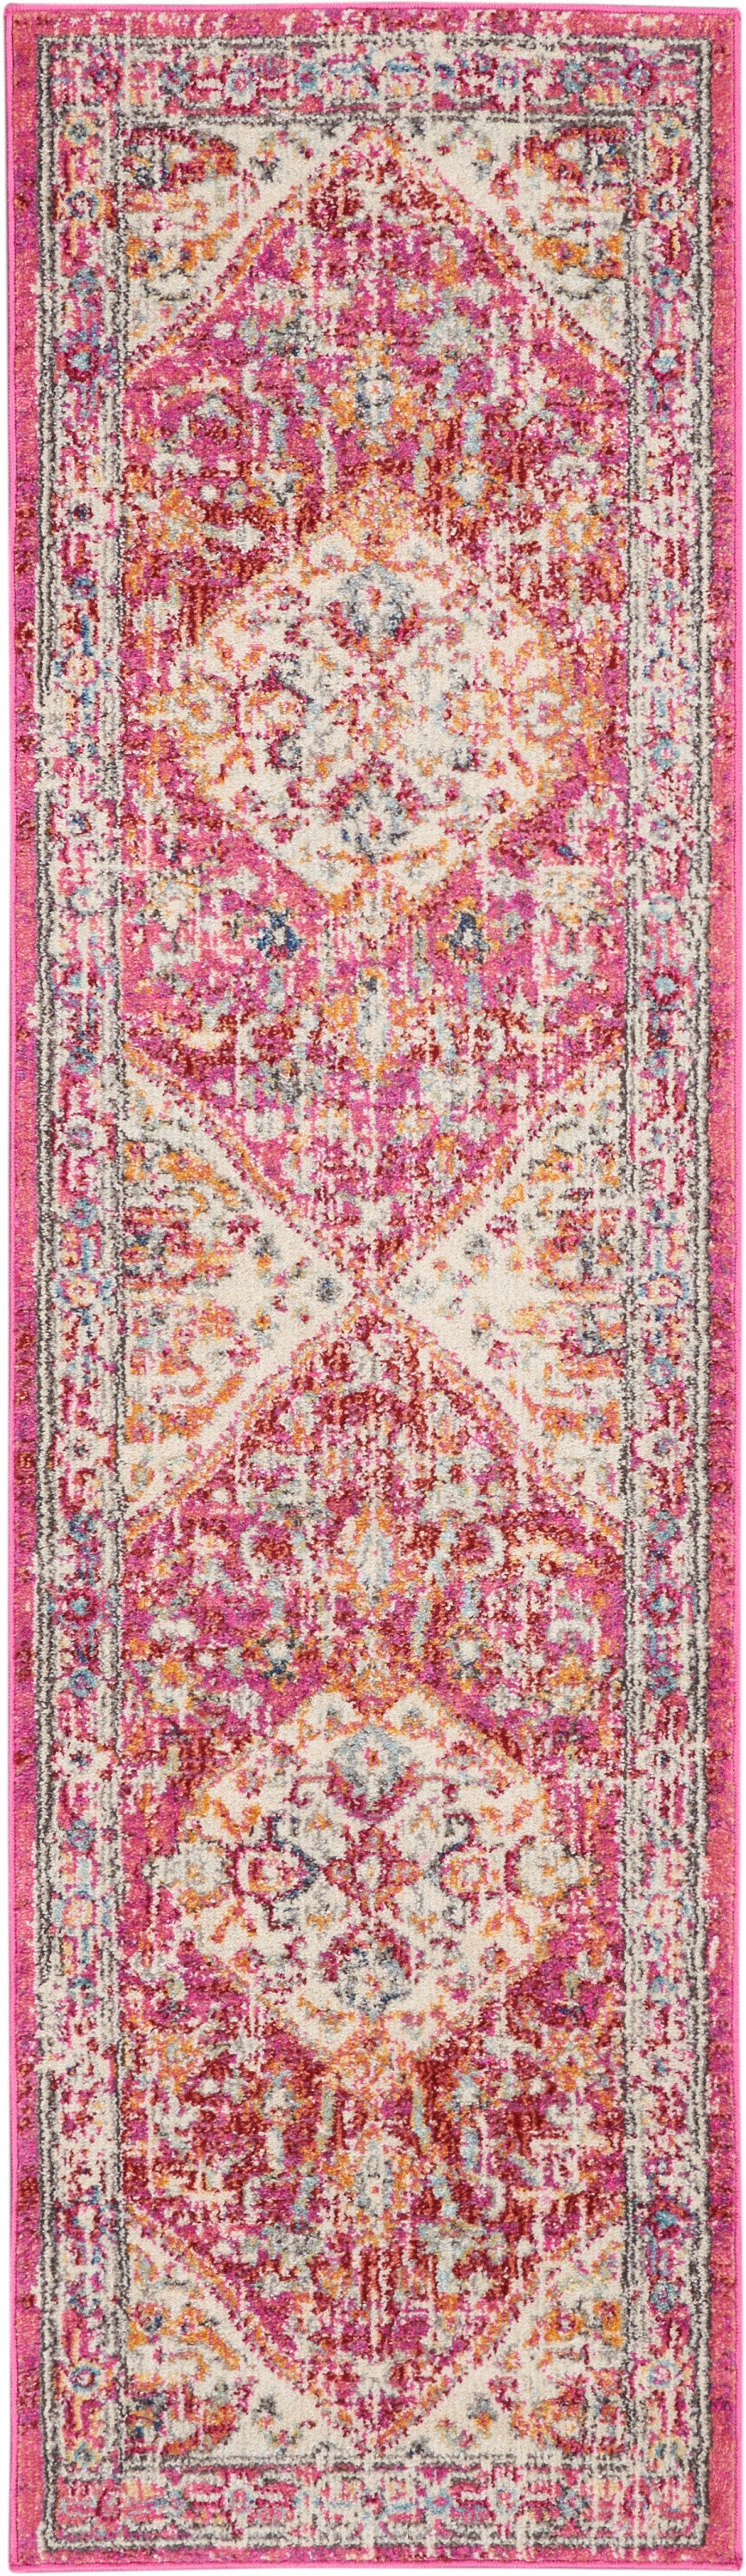 Nourison Passion 8' Runner Ivory and Pink Area Rug PSN23 Ivory/Pink